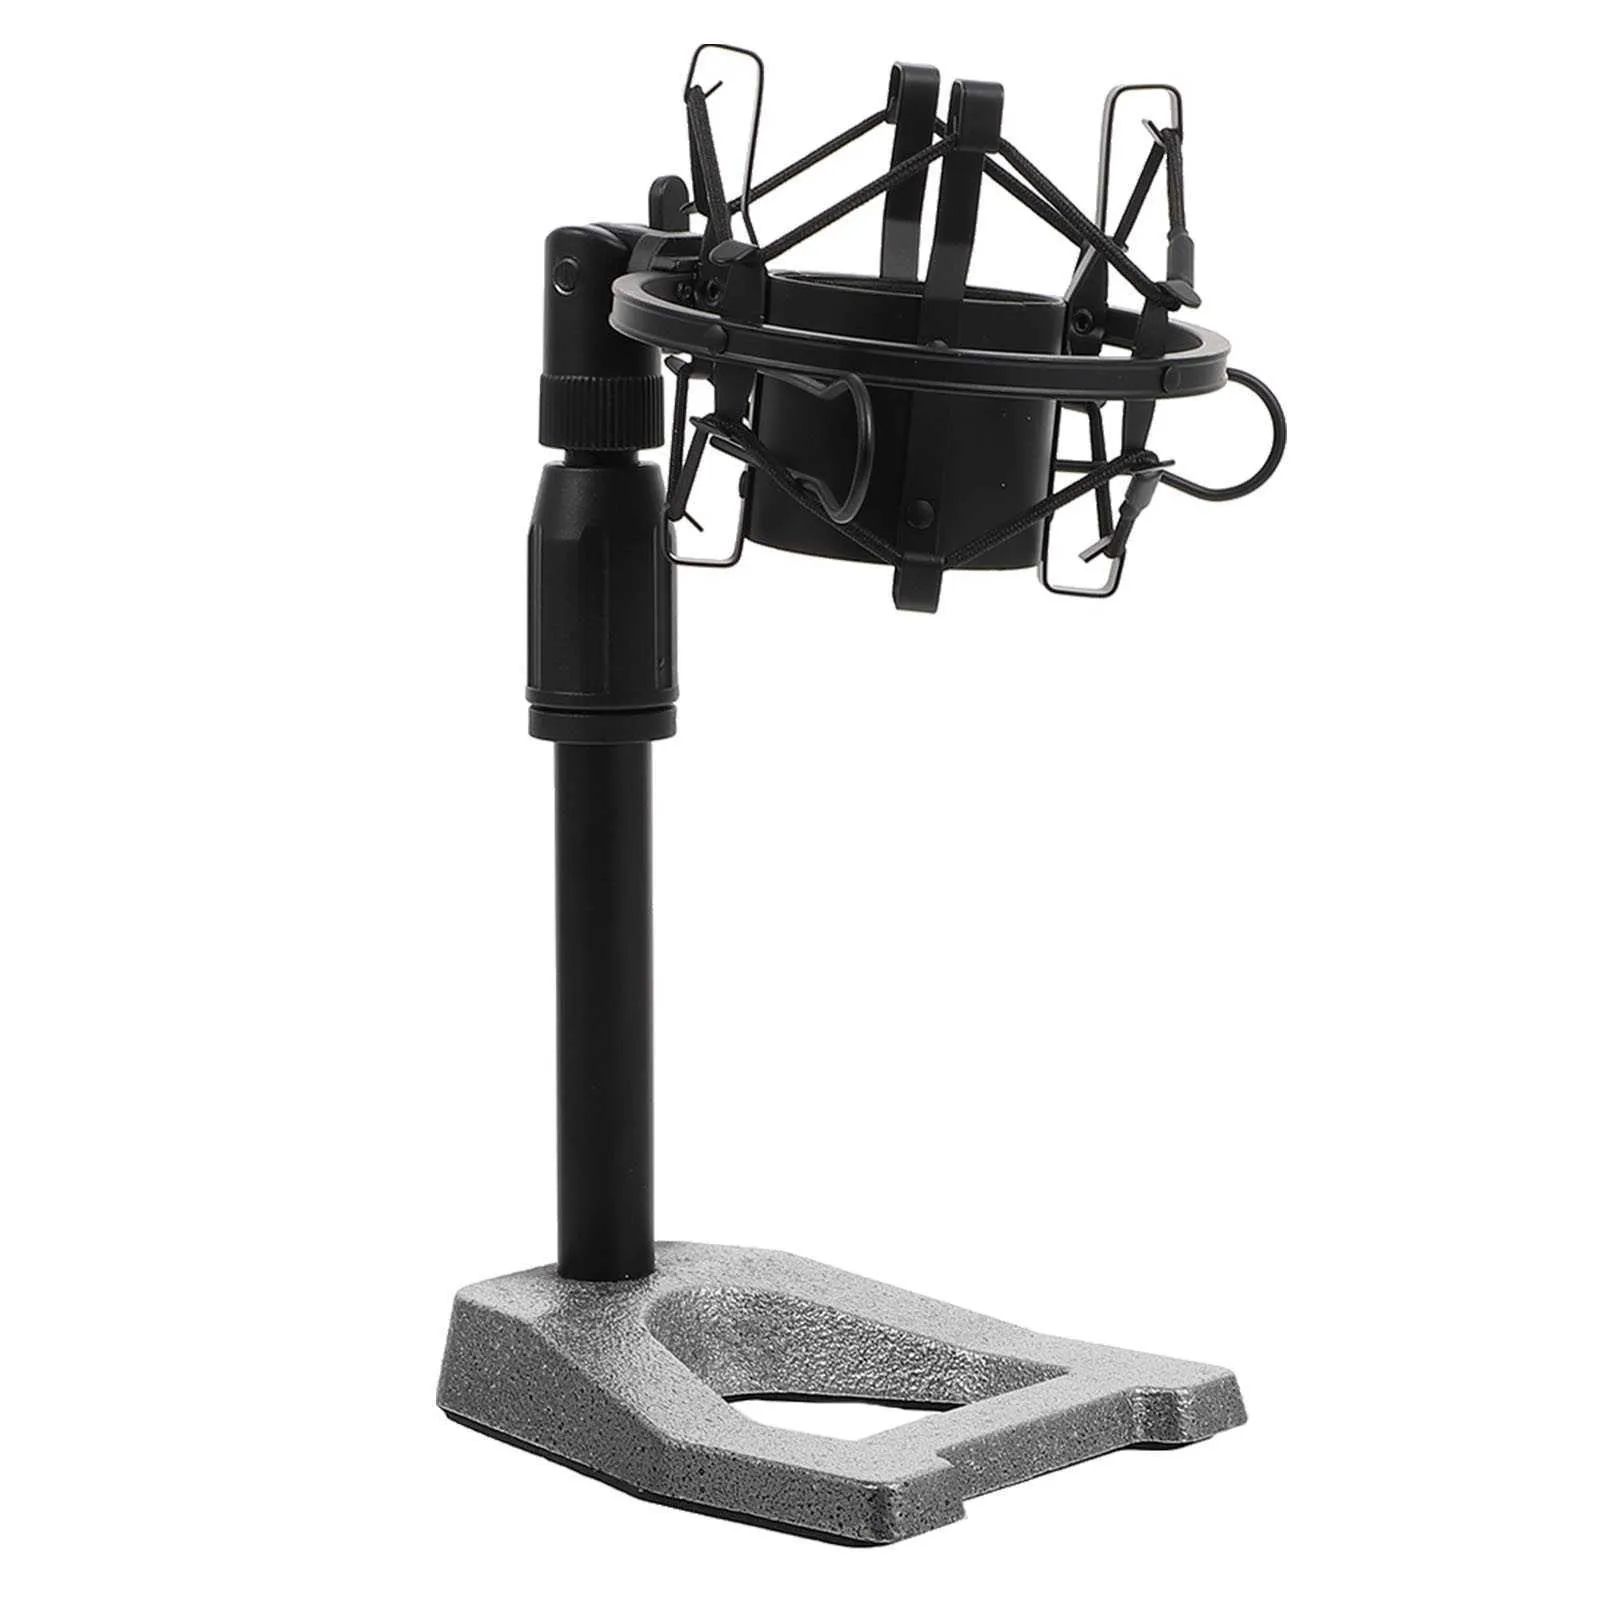 Mic Mount Desk Microphone Drum Stand Support Holder Clip Arm Boommics TripoDClips Live Streaming Equipment Bracket